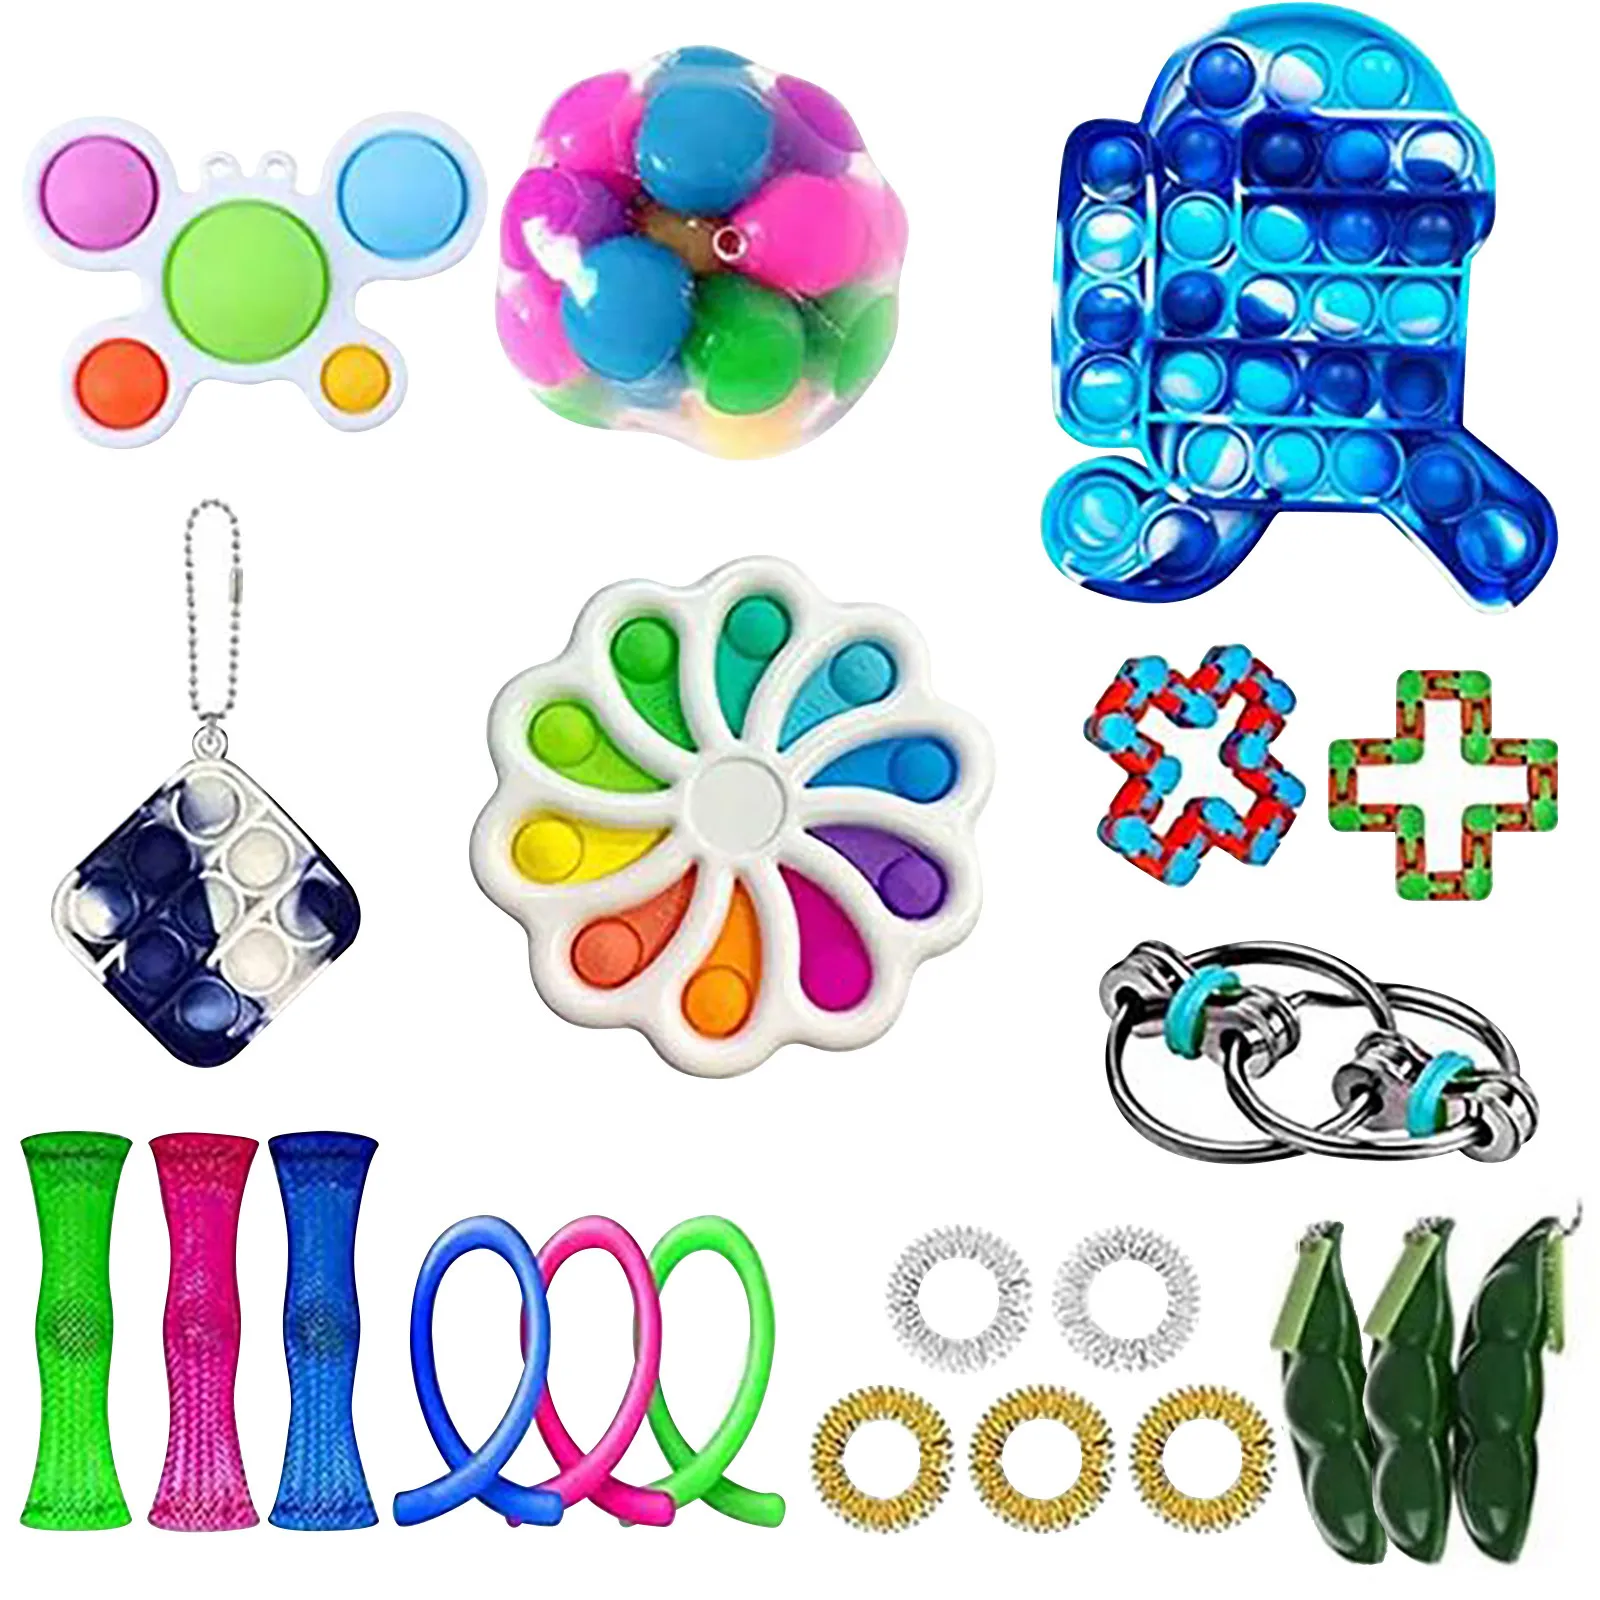 

Fidget Toys Antistress Set Stretchy Strings Push Gift Adults Children Autism Special Needs Decompression Squishy Sensory Toys